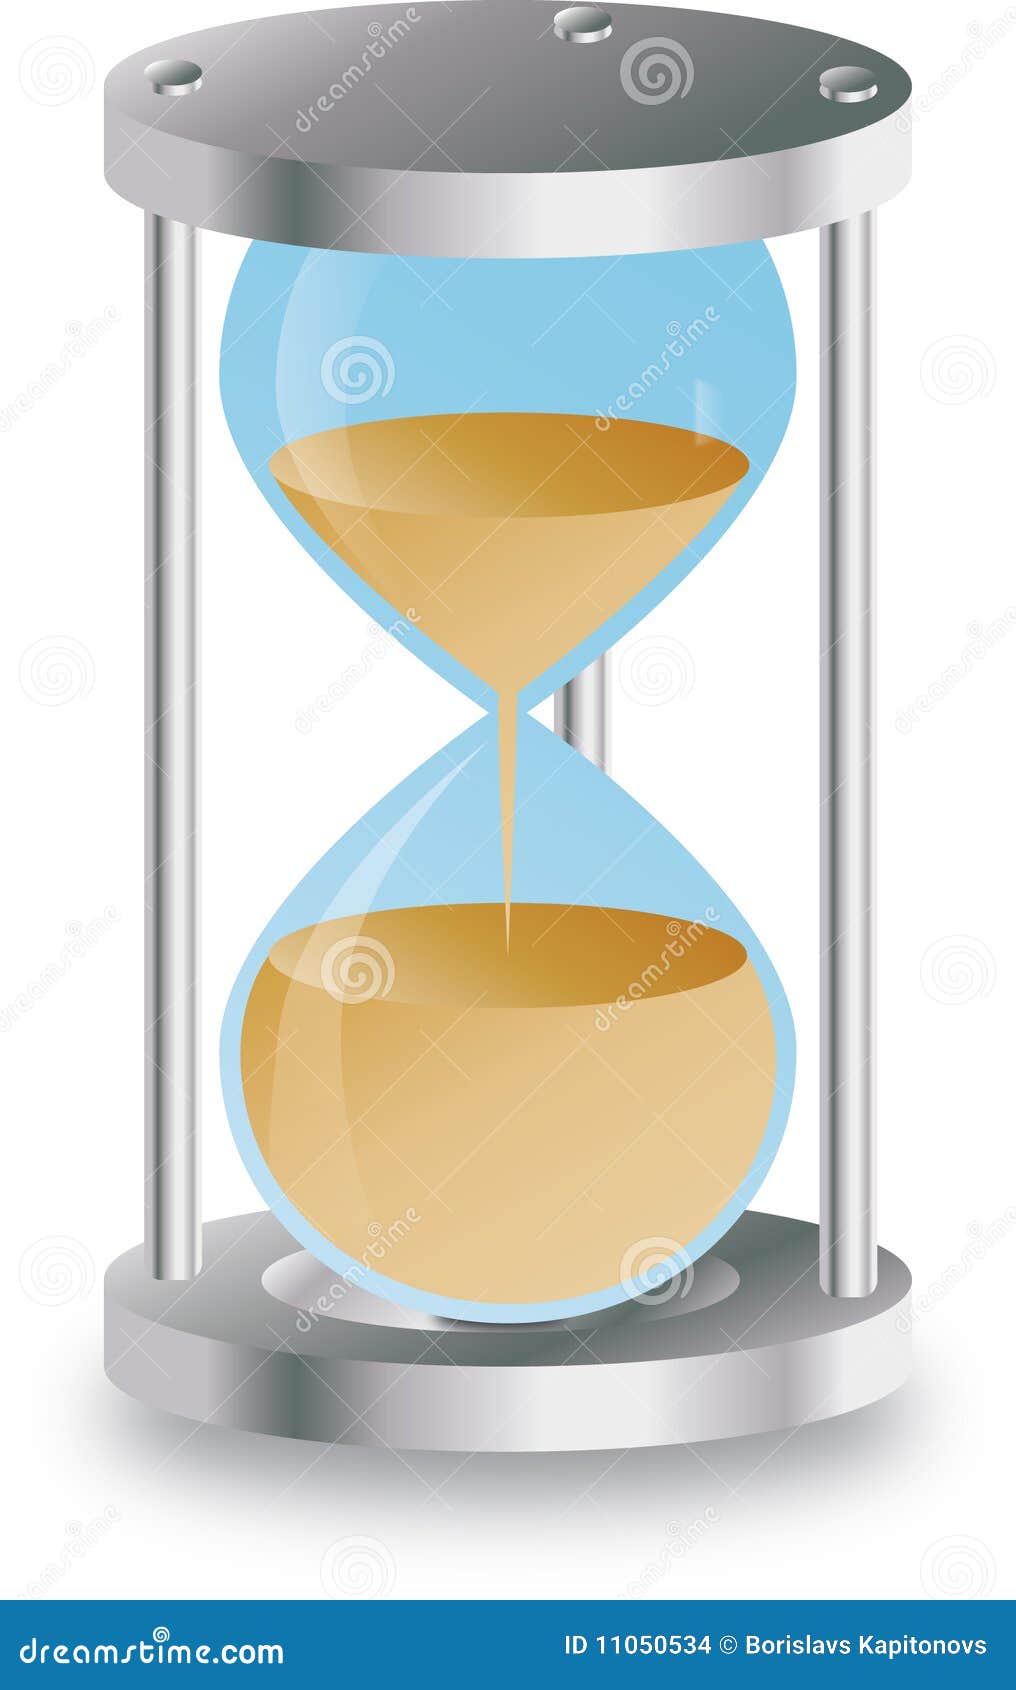 Sand Clock Stock Images - Image: 11050534